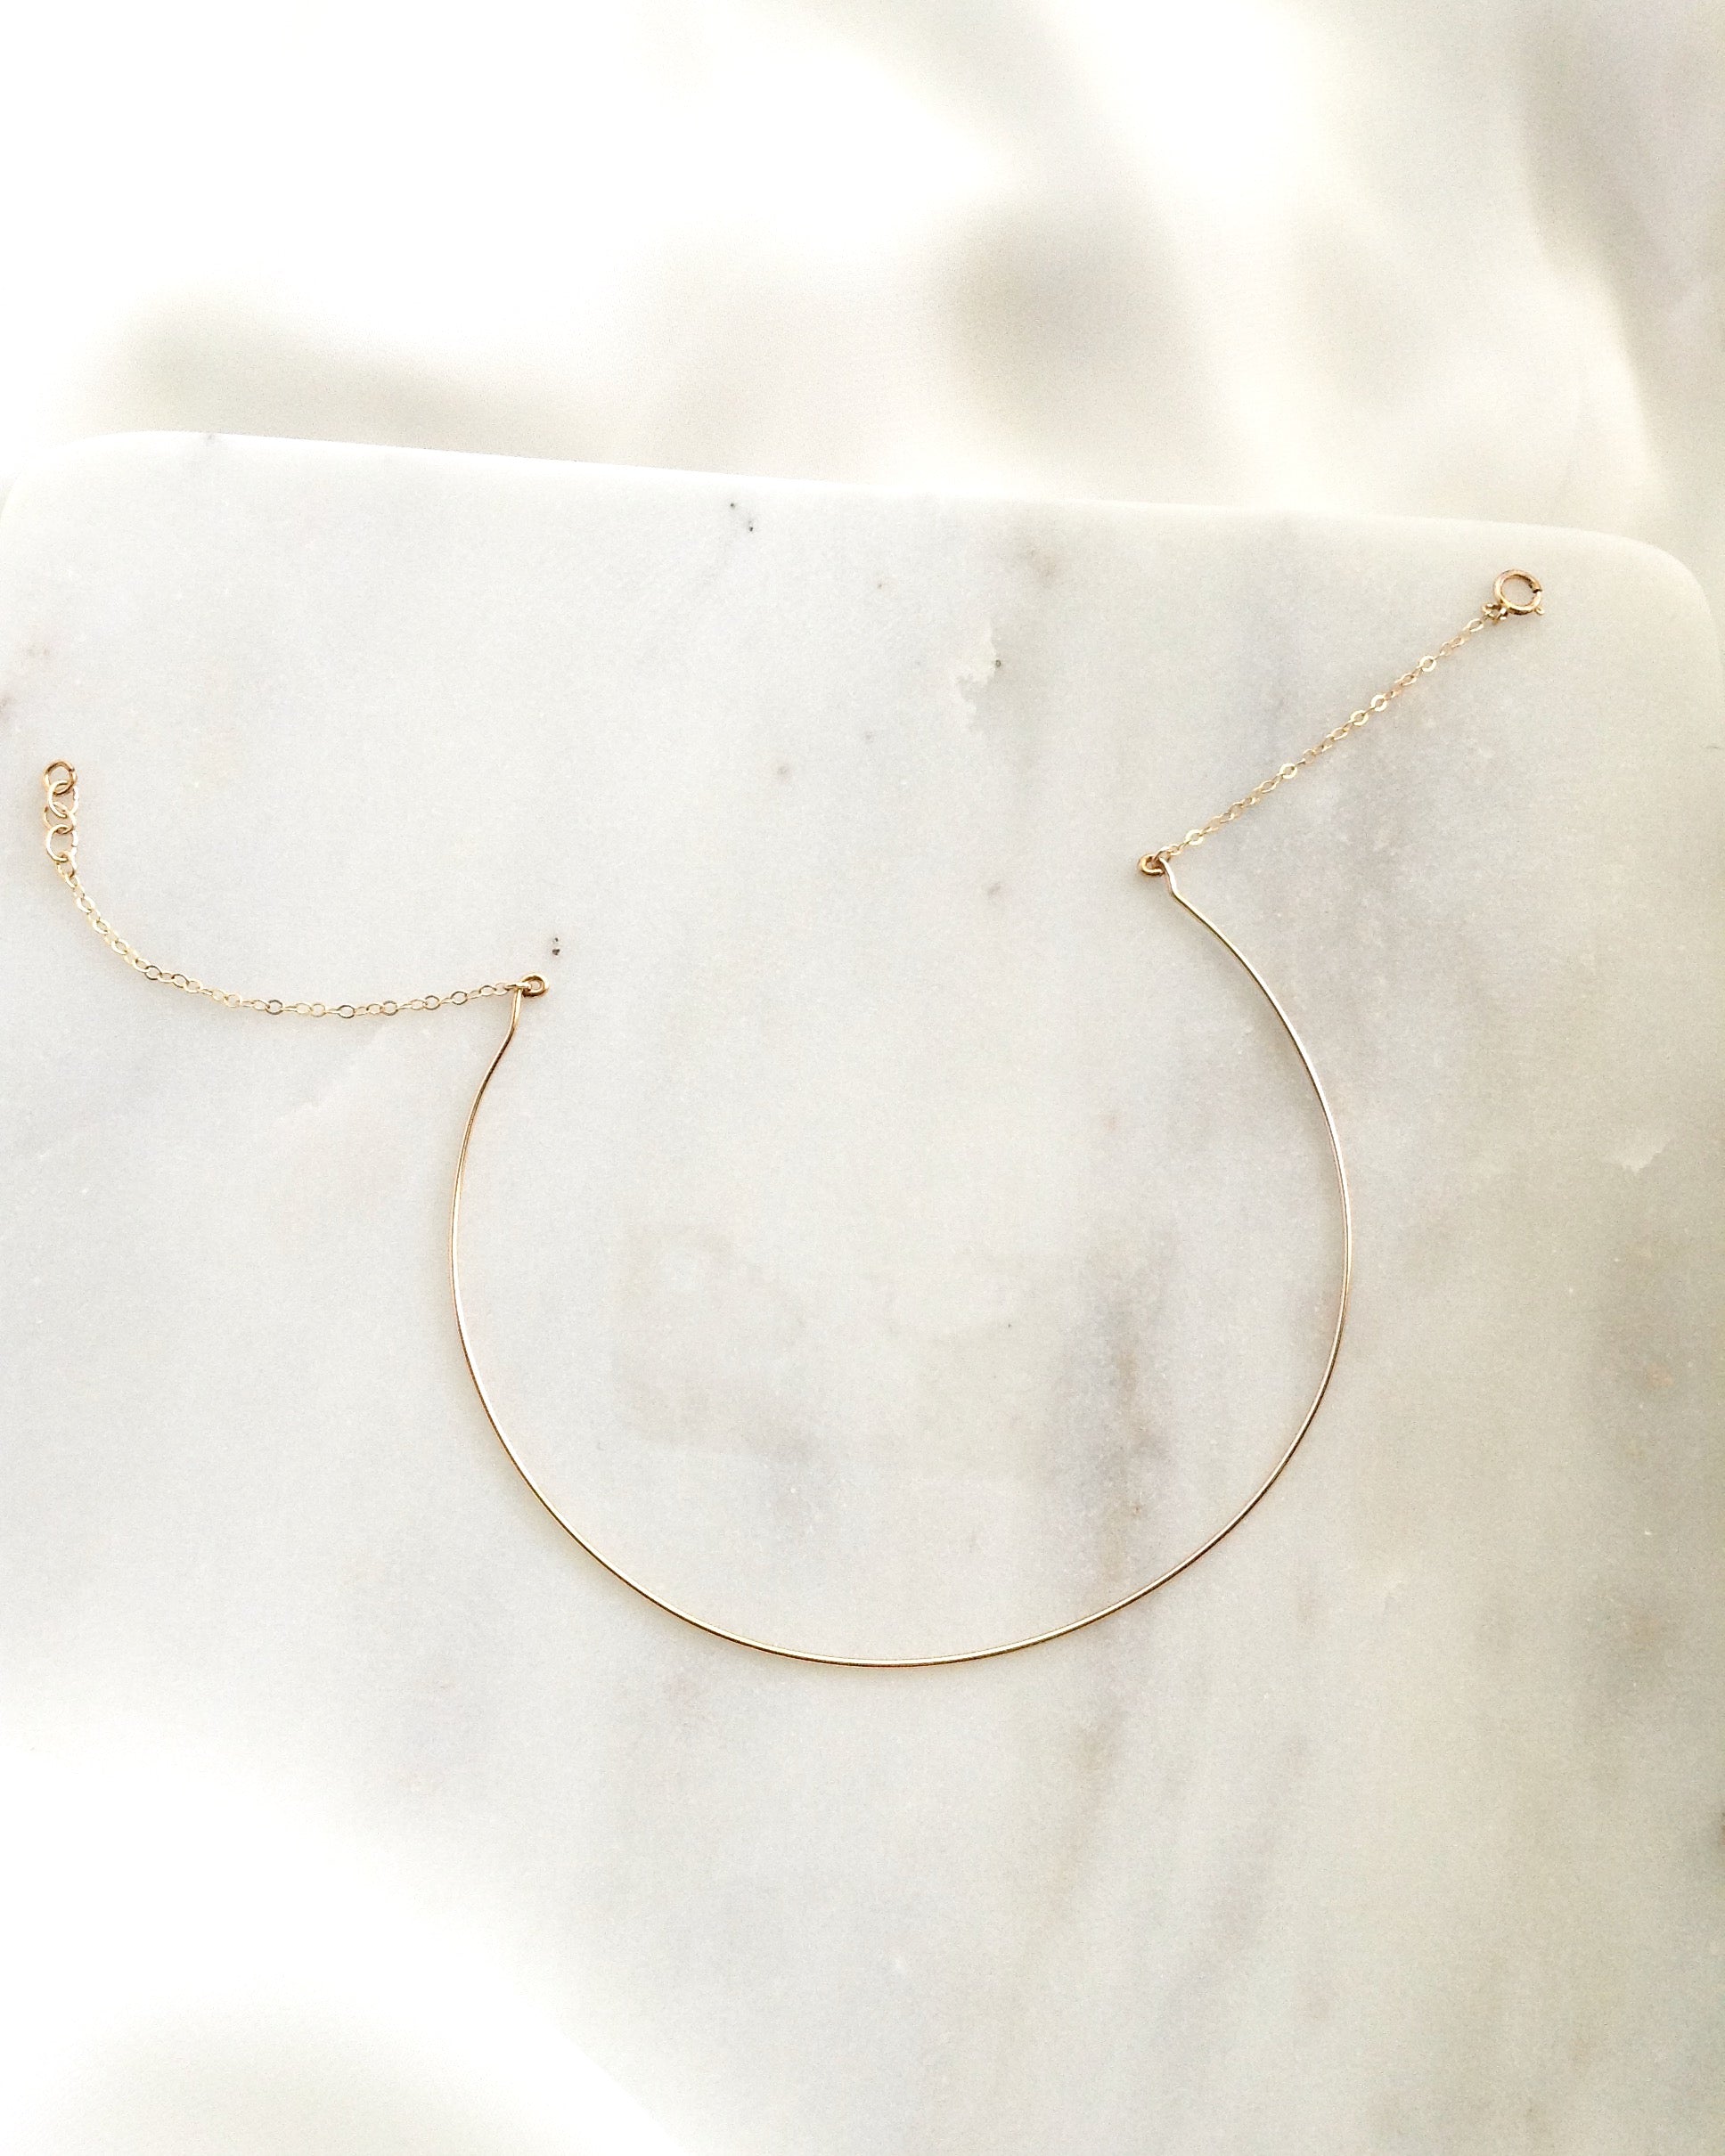 Thin Wire Choker in Gold Filled or Sterling Silver | Dainty Minimalist Choker Necklace | IB Jewelry